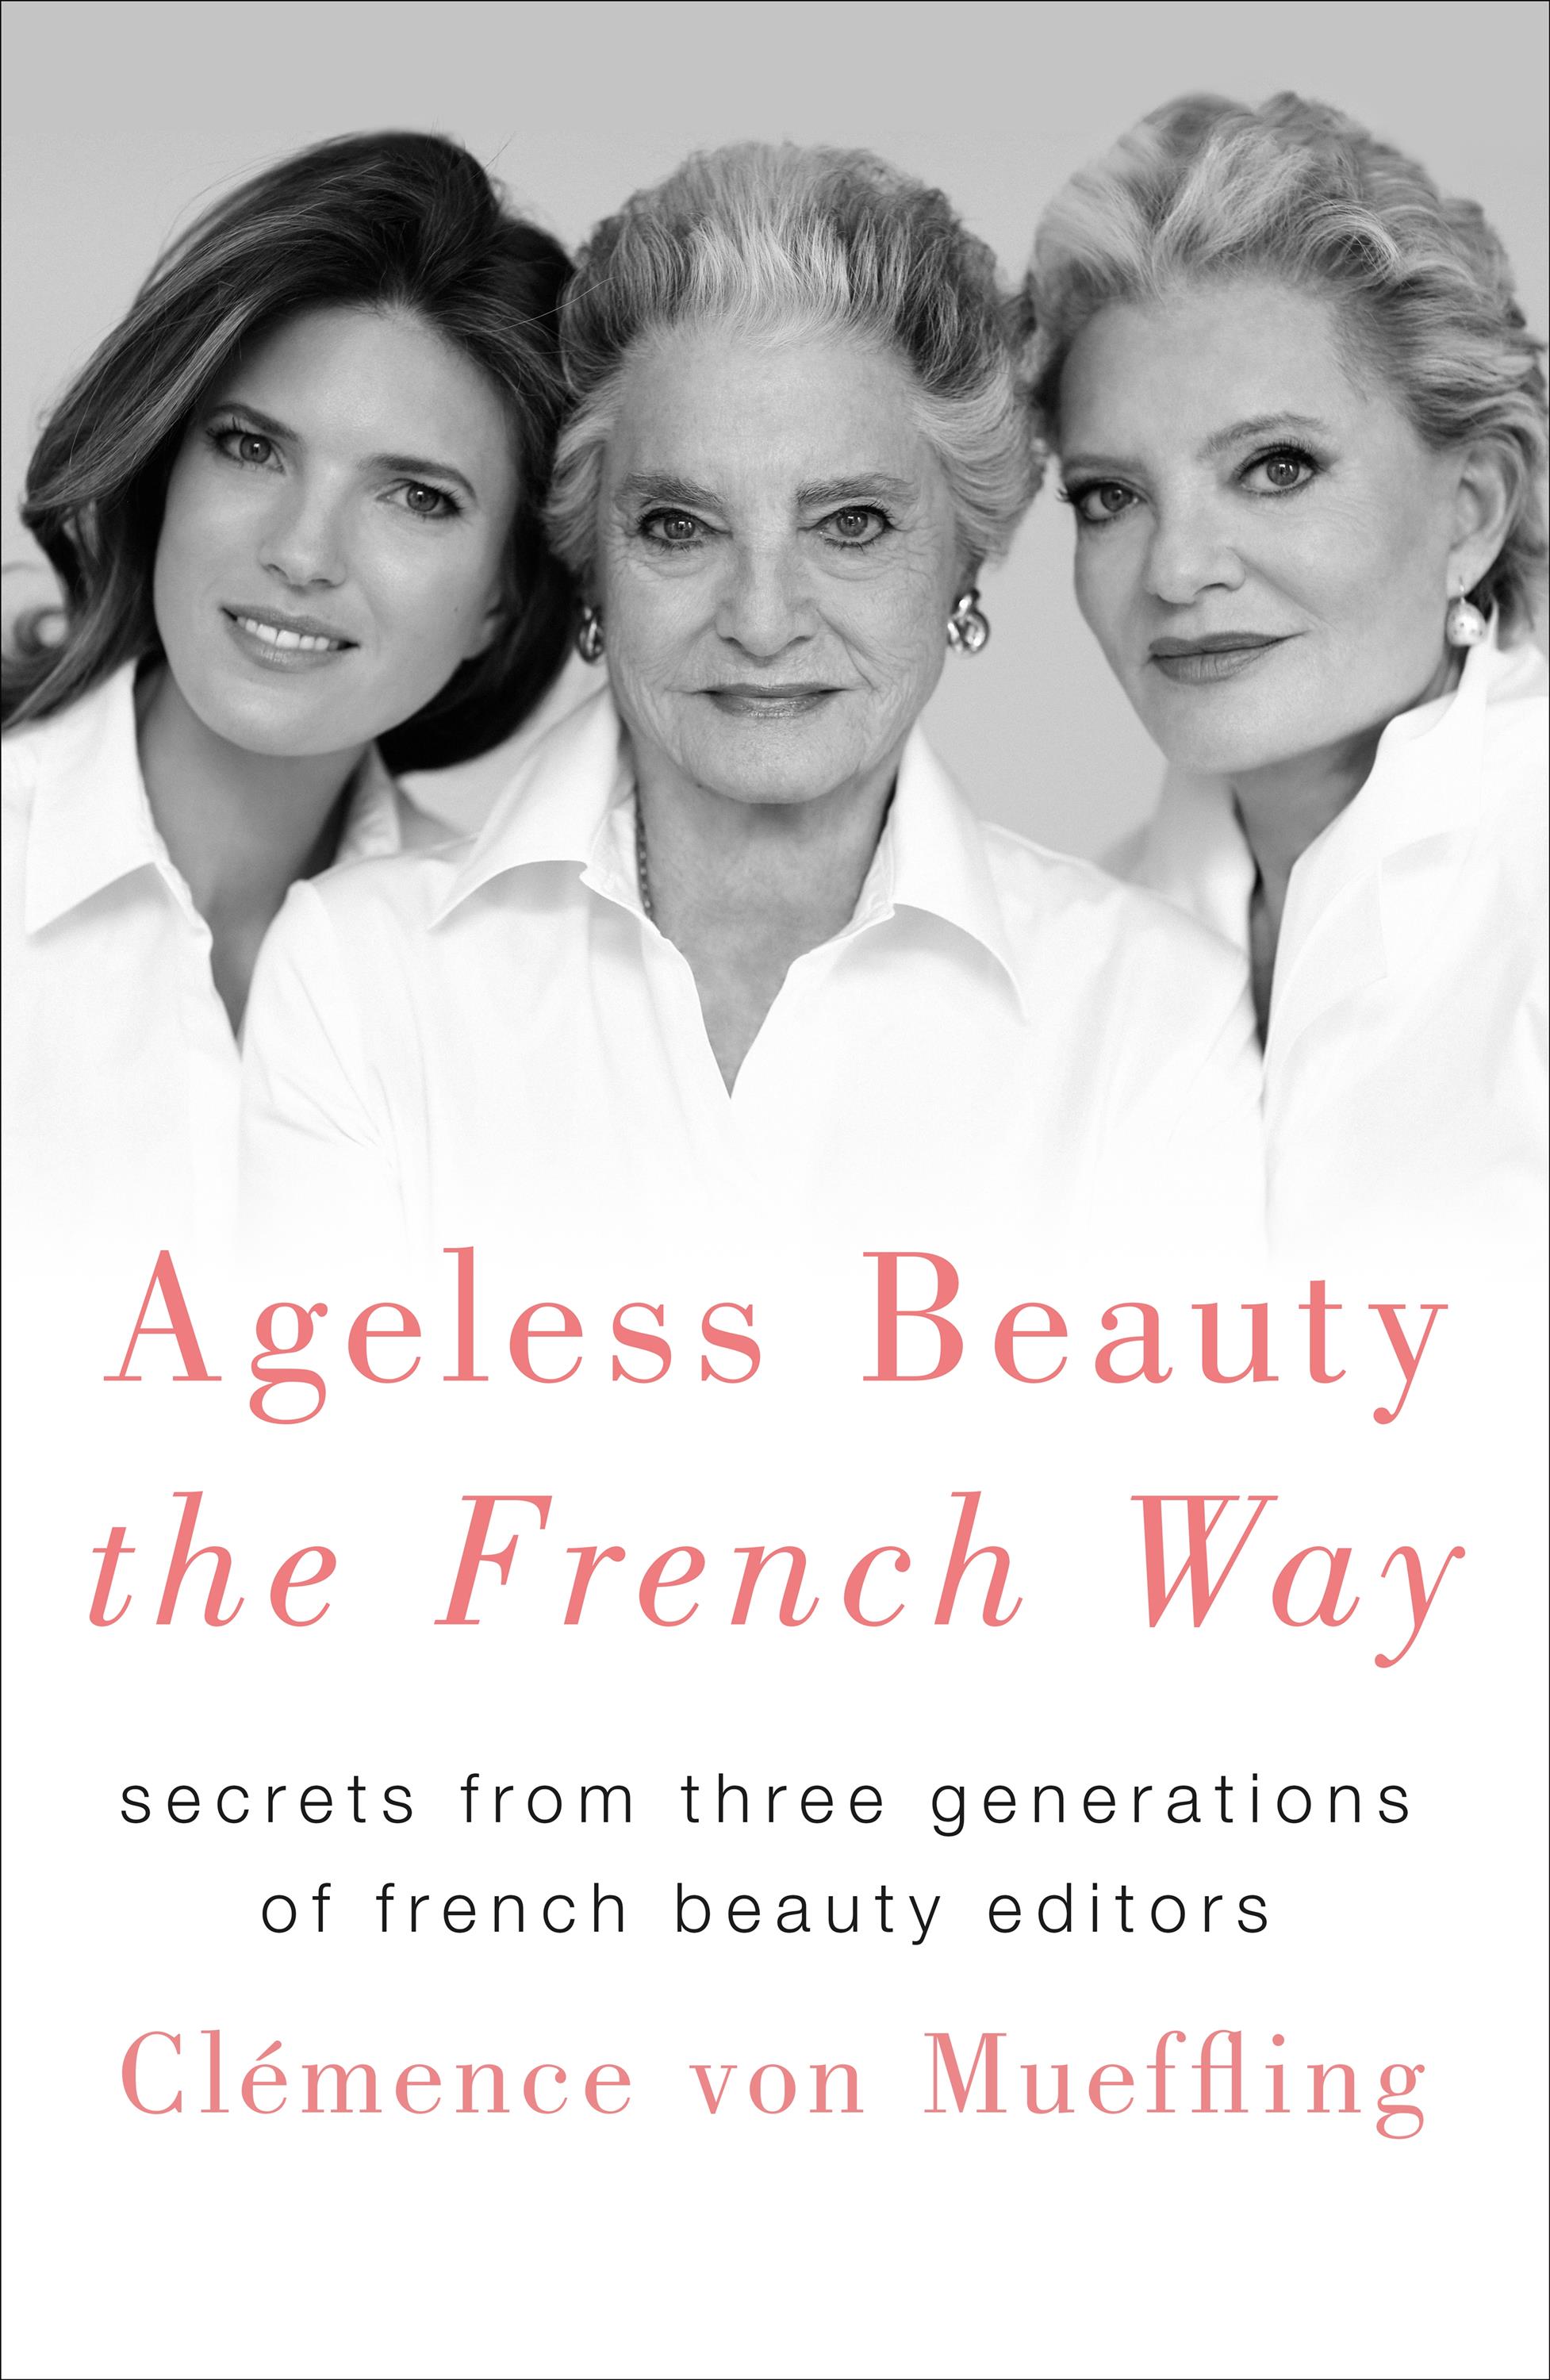 Ageless Beauty the French Way